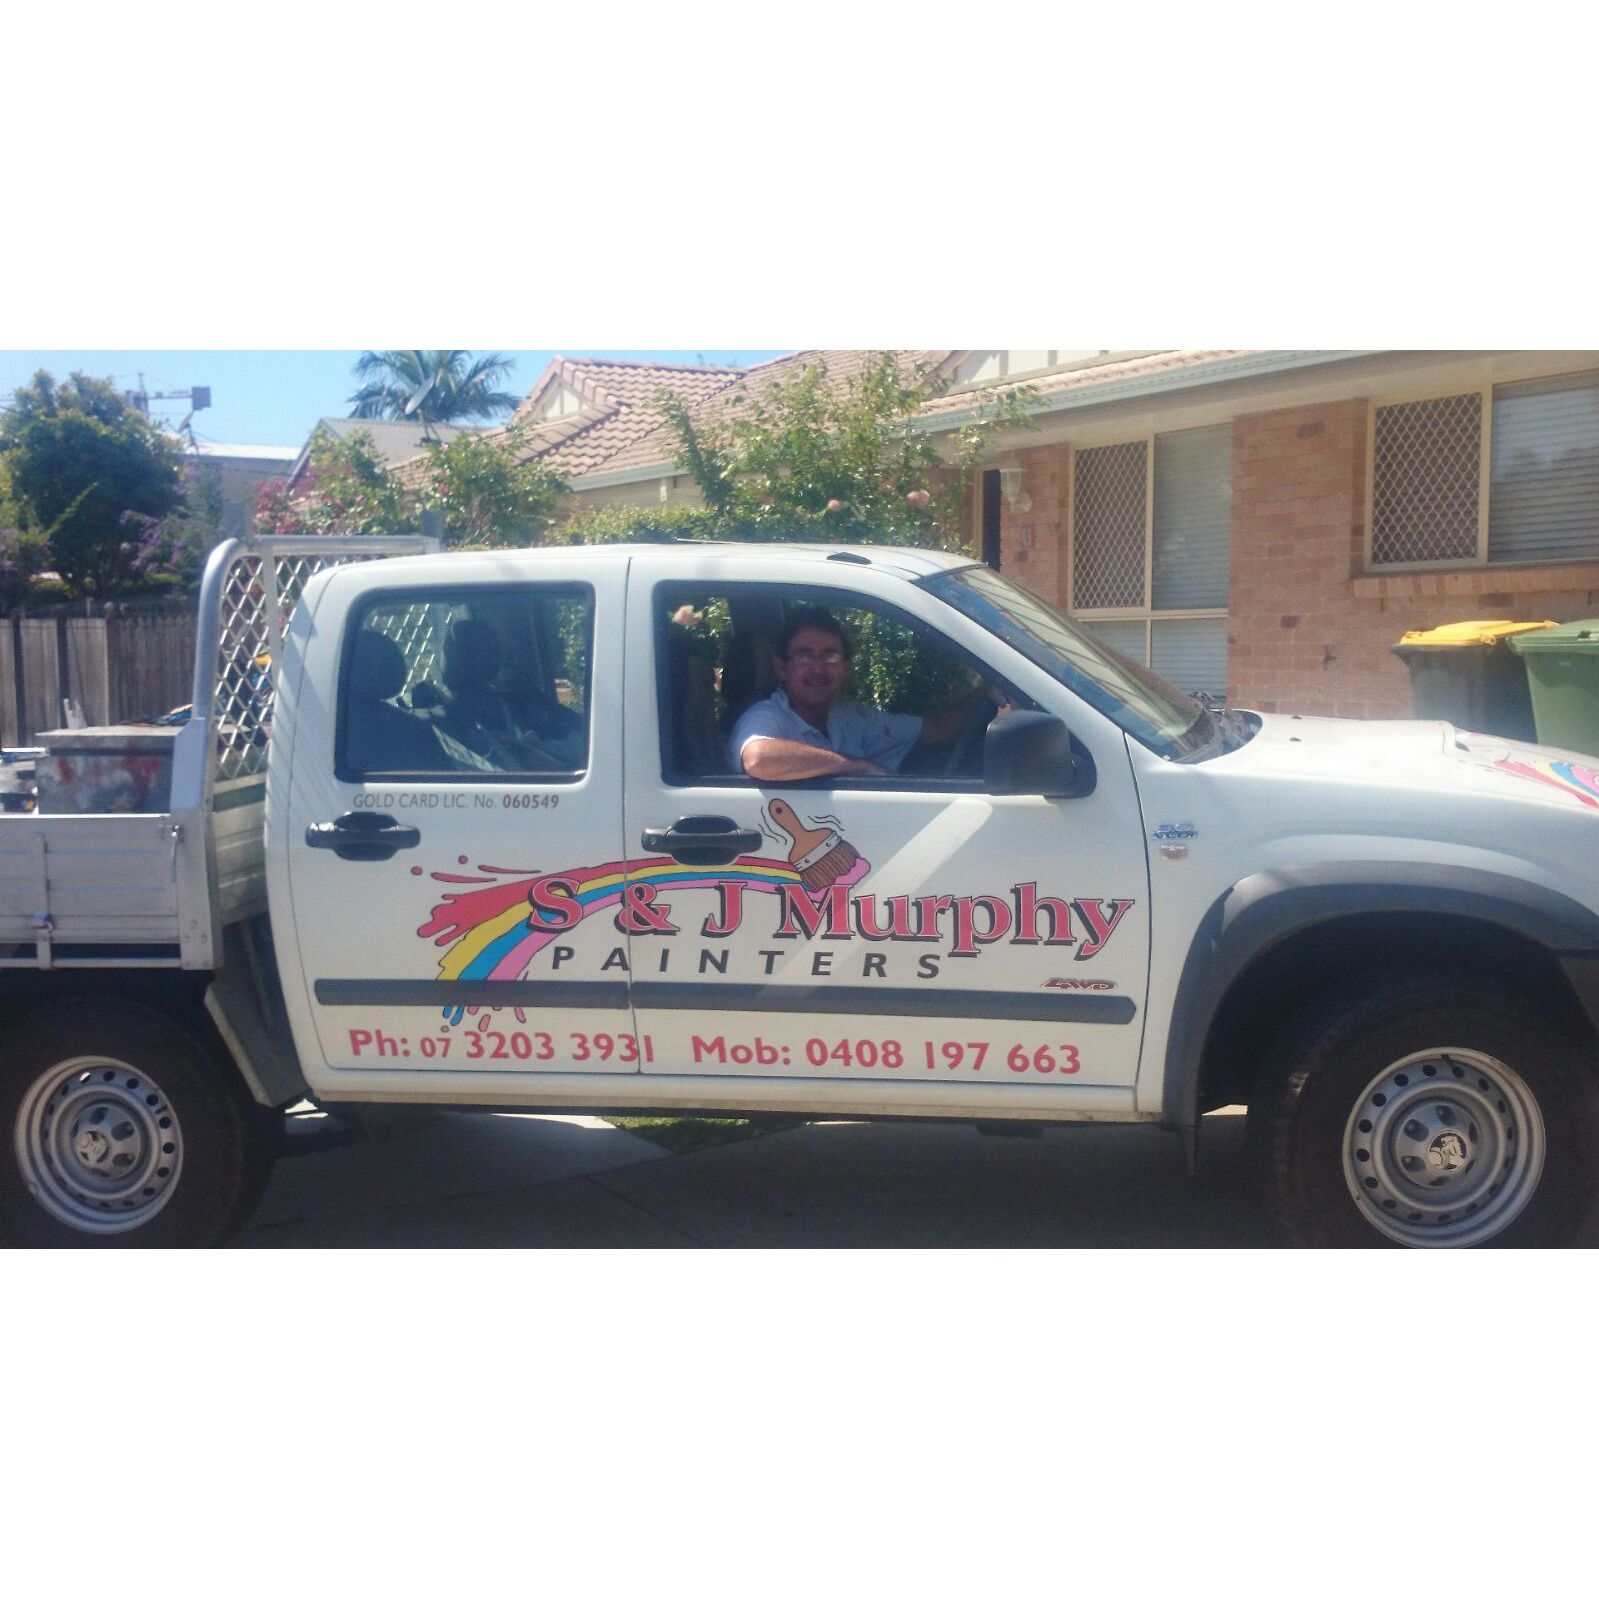 S and J Murphy Painters - Deception Bay, QLD - 0408 197 663 | ShowMeLocal.com